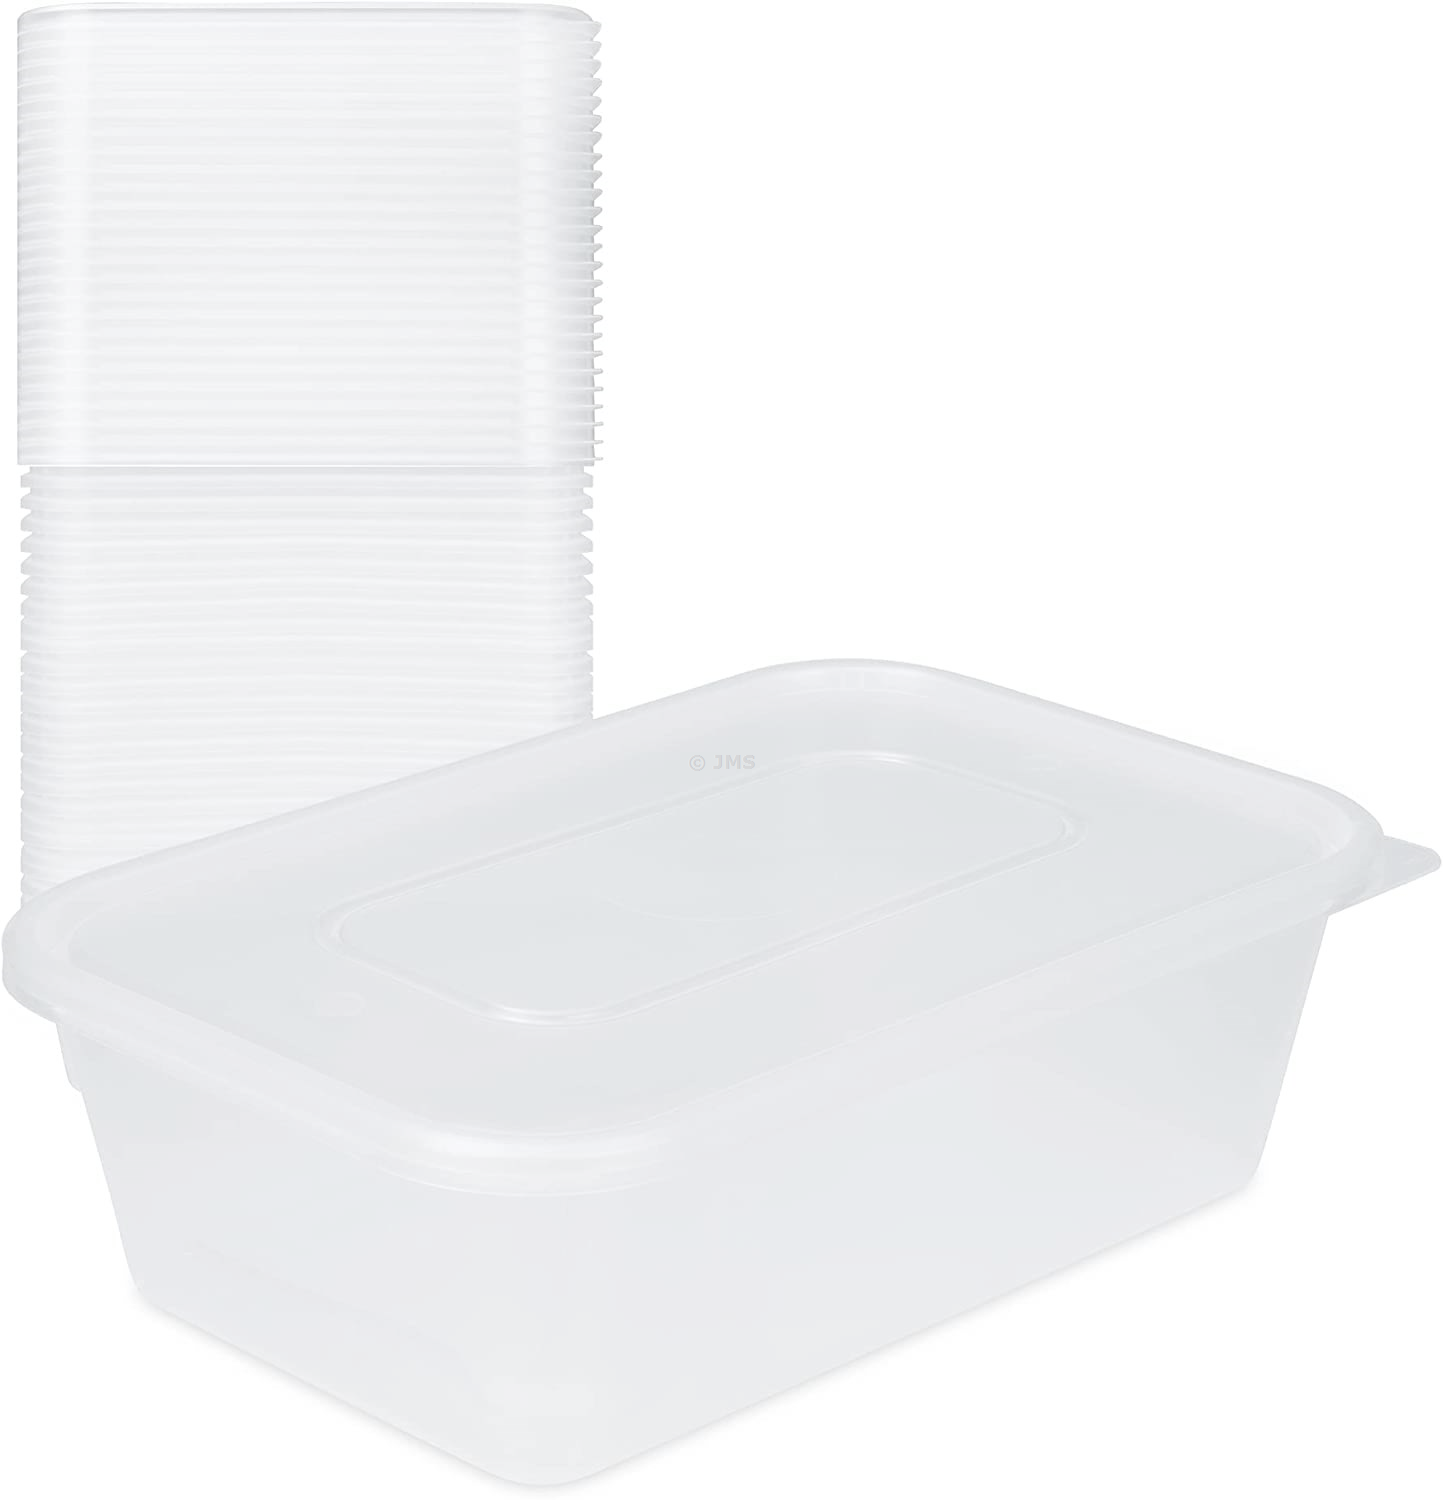 500ml clear plastic container  Plastic takeaway food containers & lids